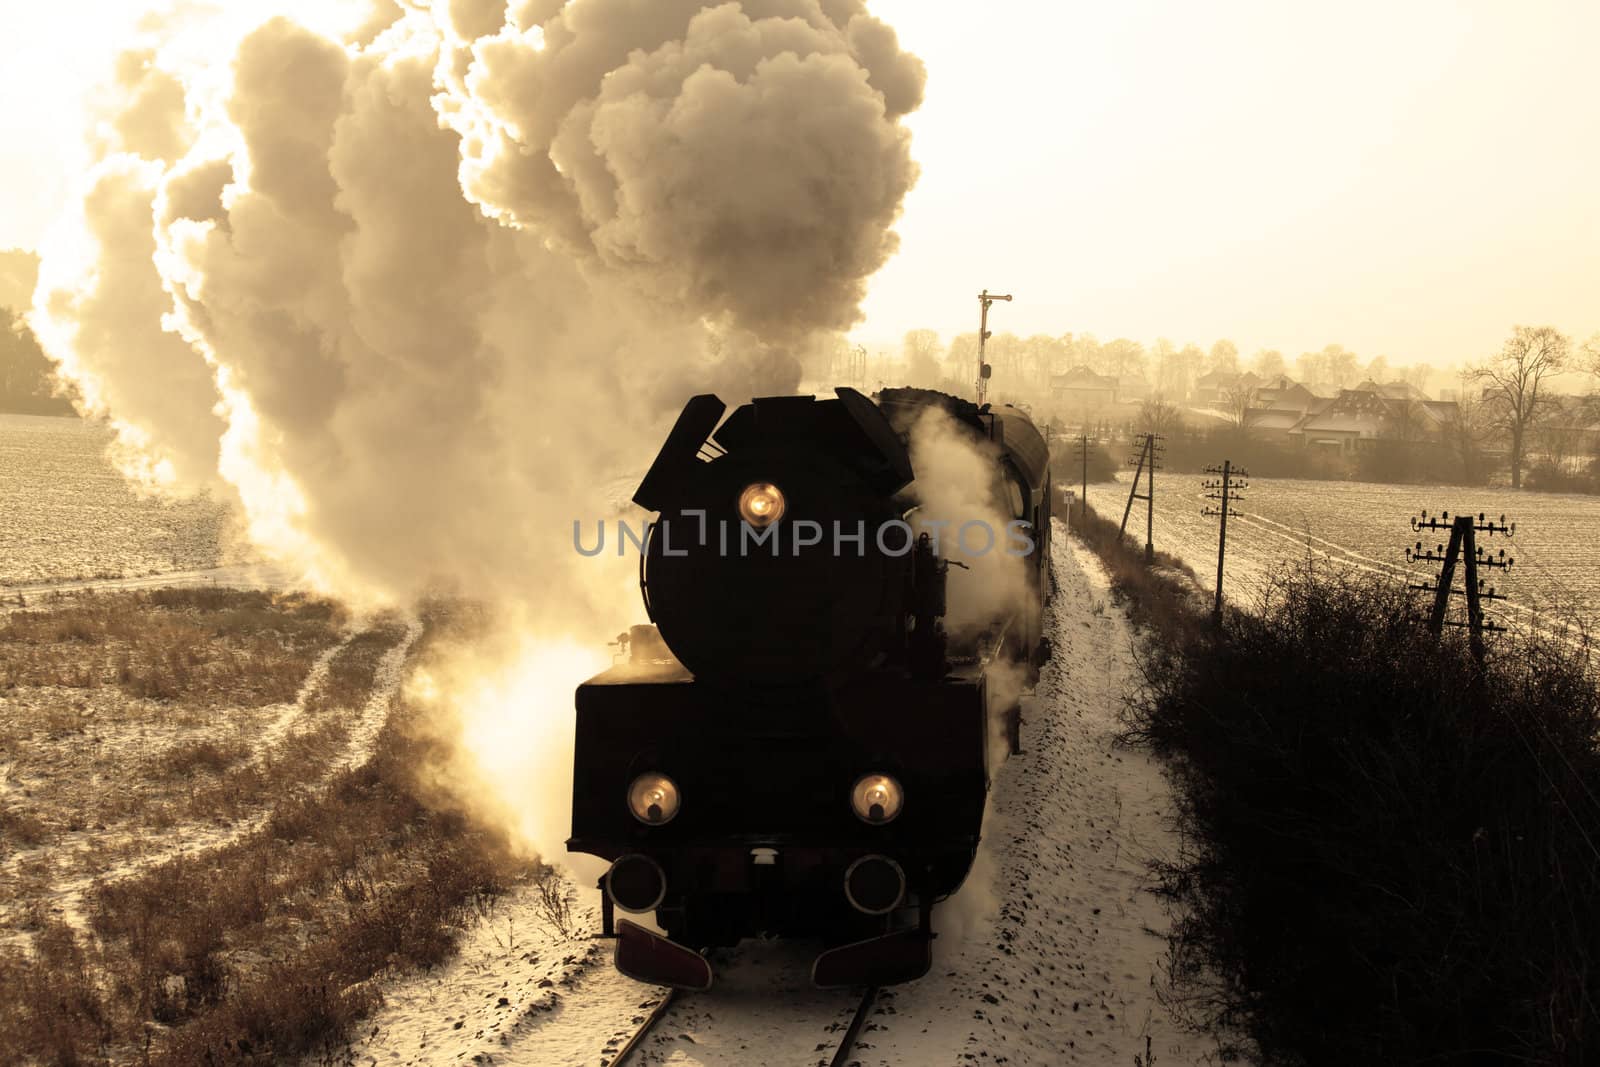 Vintage steam train starting from the station, wintertime
